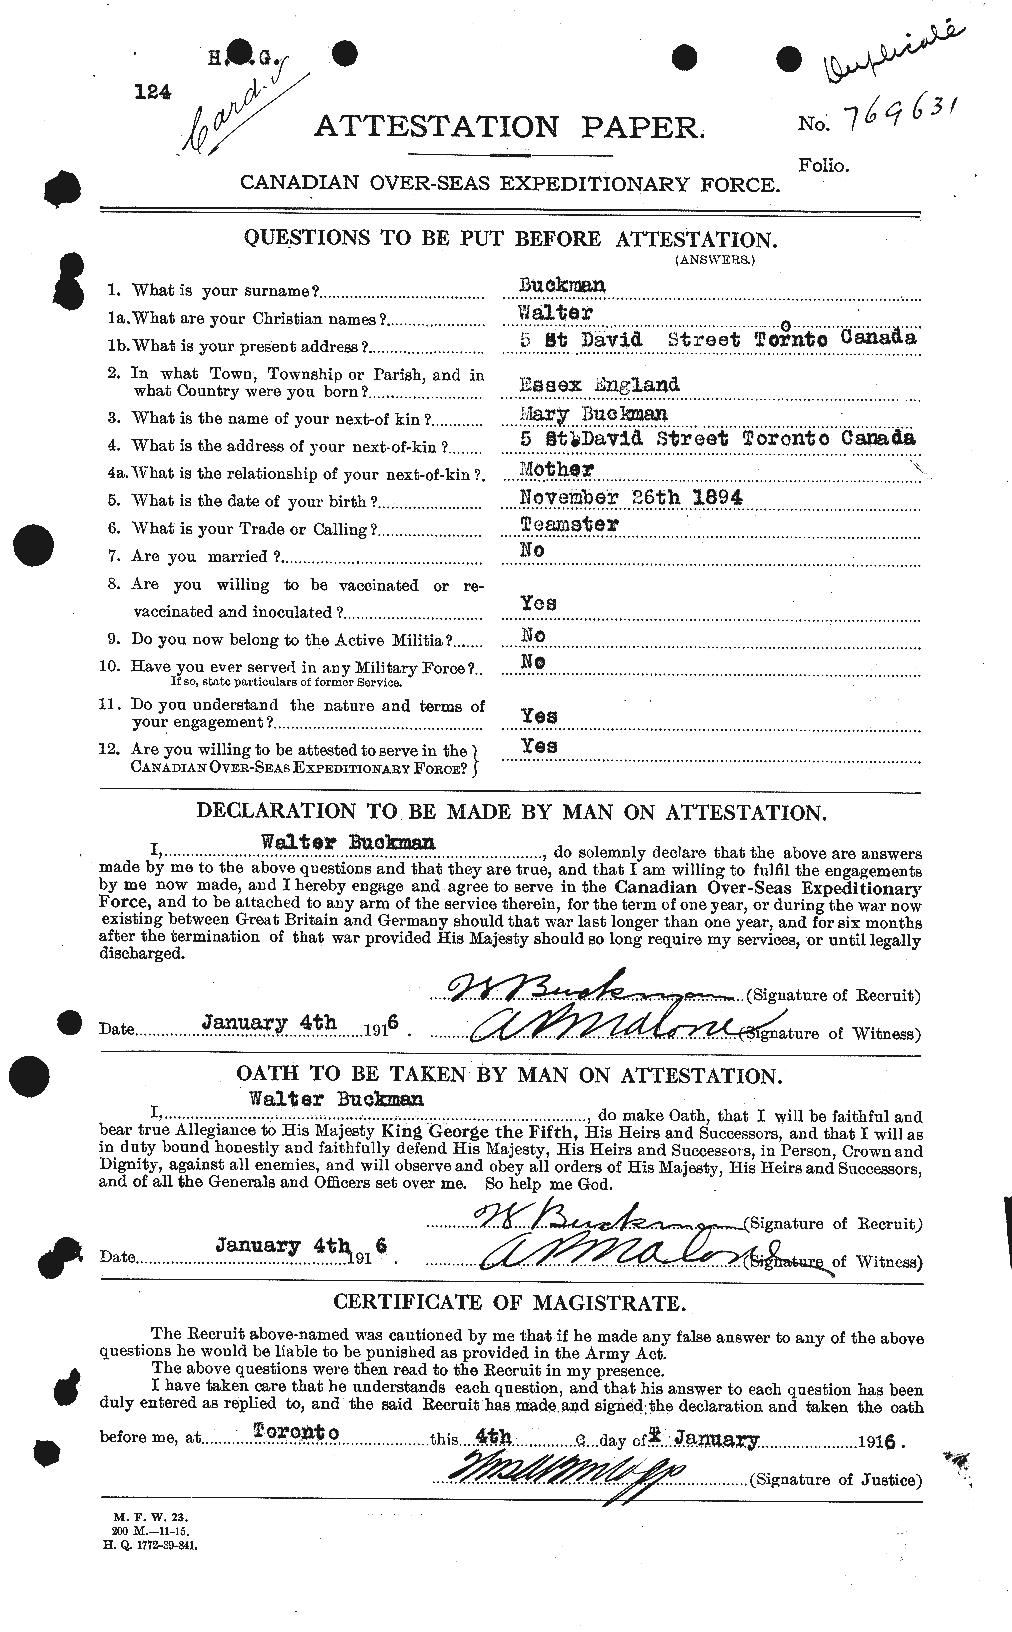 Personnel Records of the First World War - CEF 271207a